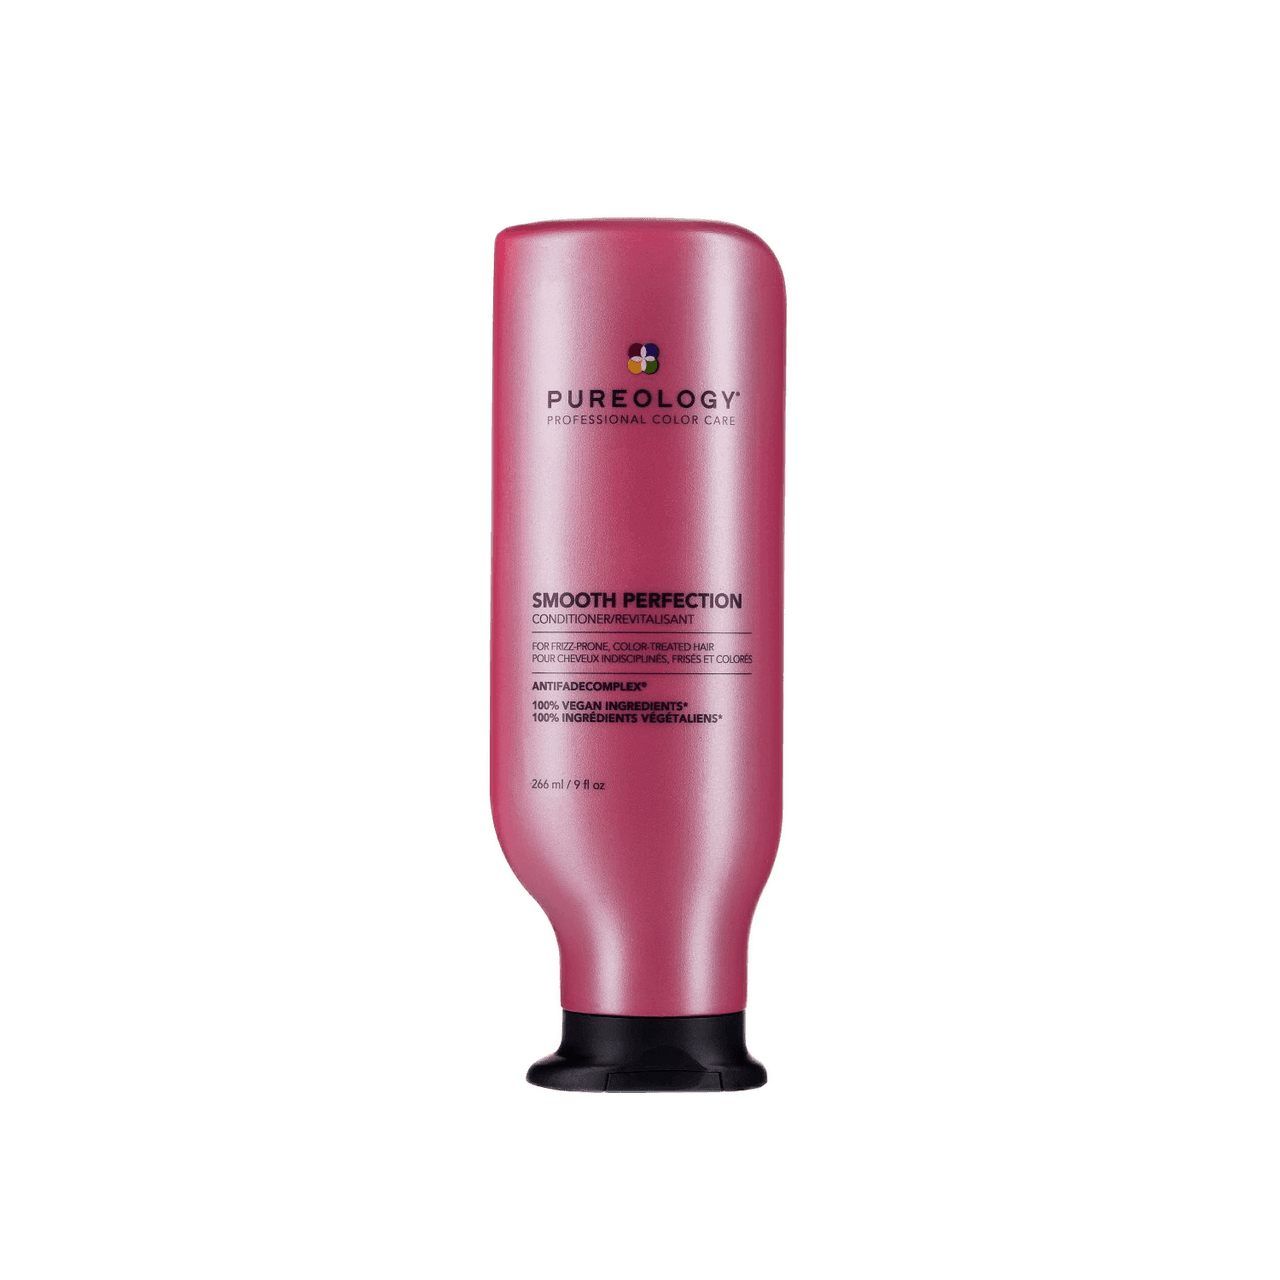 Pureology Smooth Perfection Conditioner 266mL